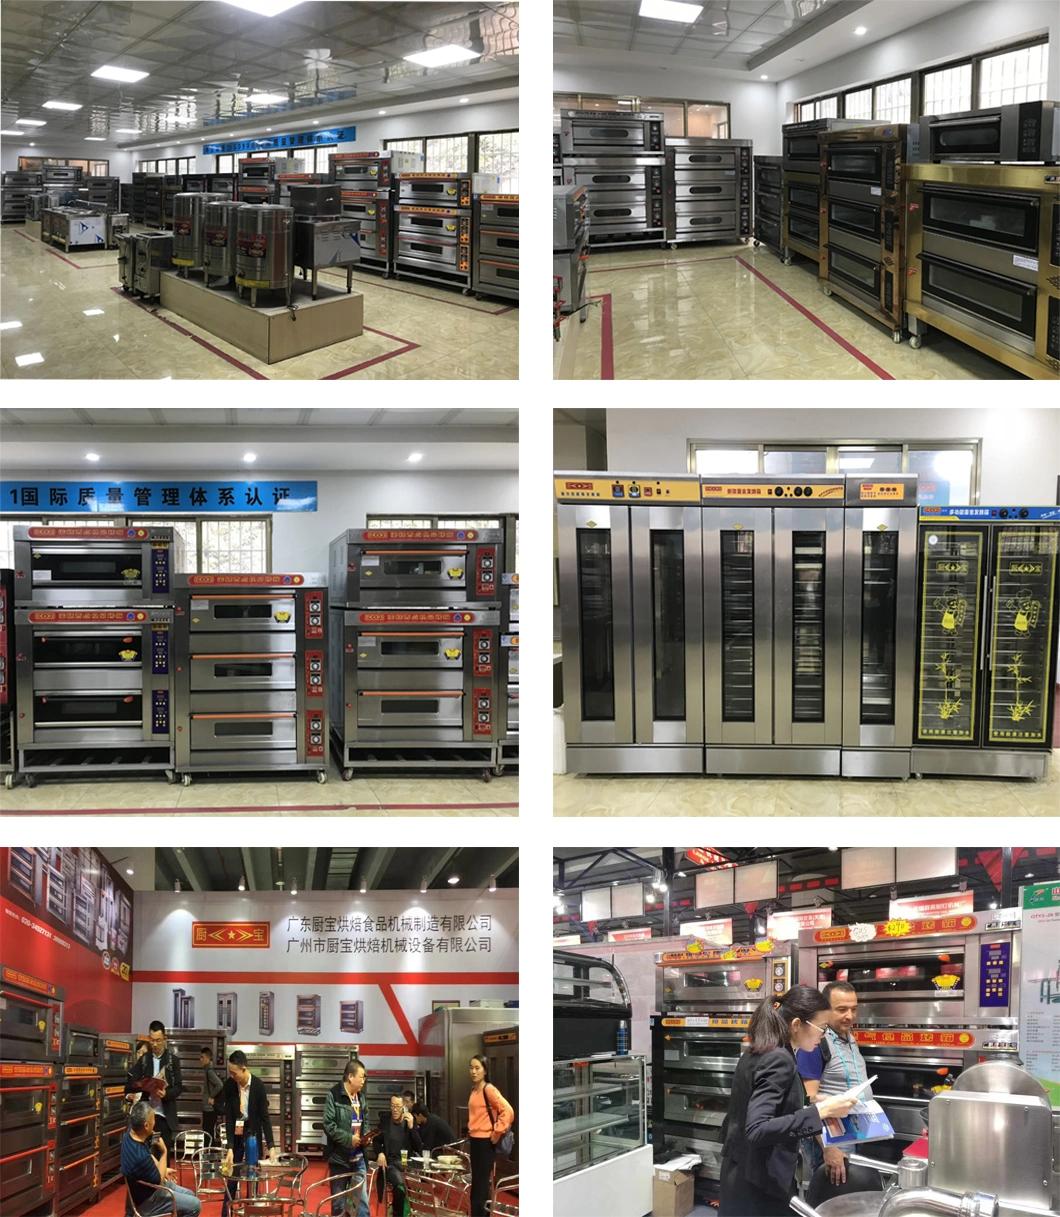 3 Deck 9 Trays Gas Pizza Oven for Commercial Restaurant Kitchen Baking Equipment Bakery Machinery Food Oven